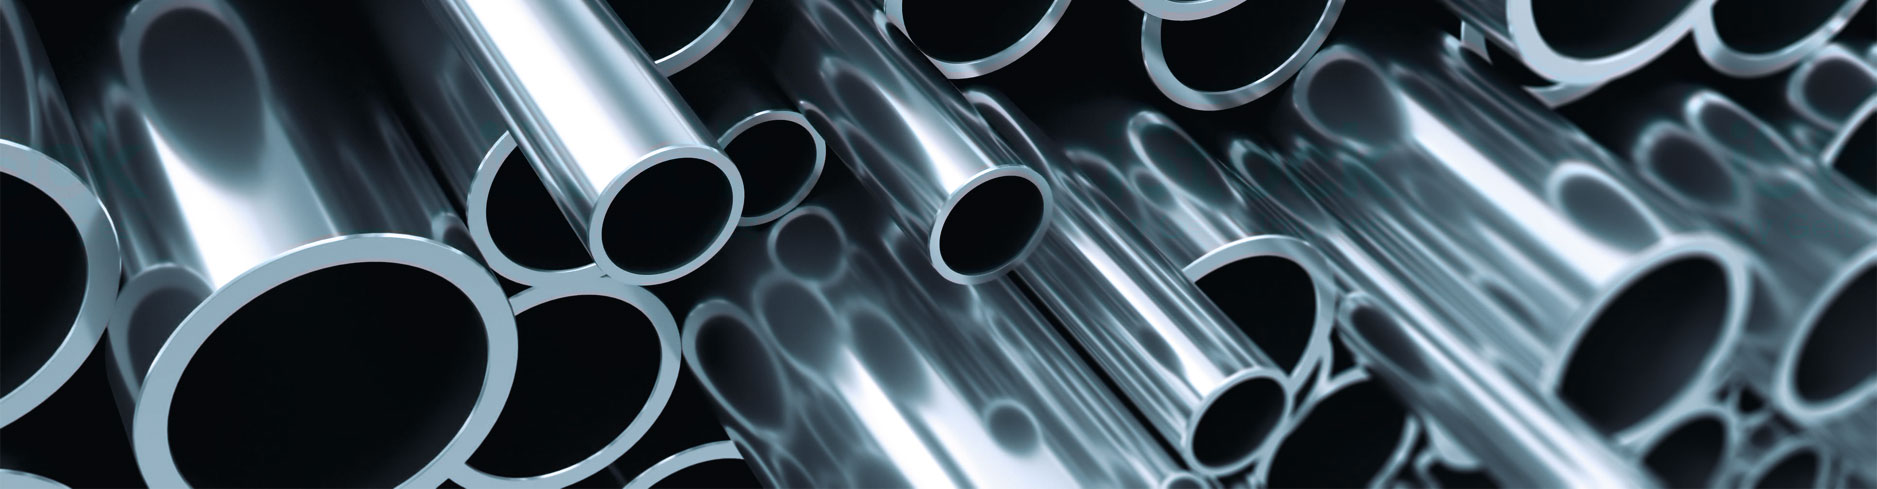 heap-of-shiny-metal-steel-pipes-with-selective-focus-effect